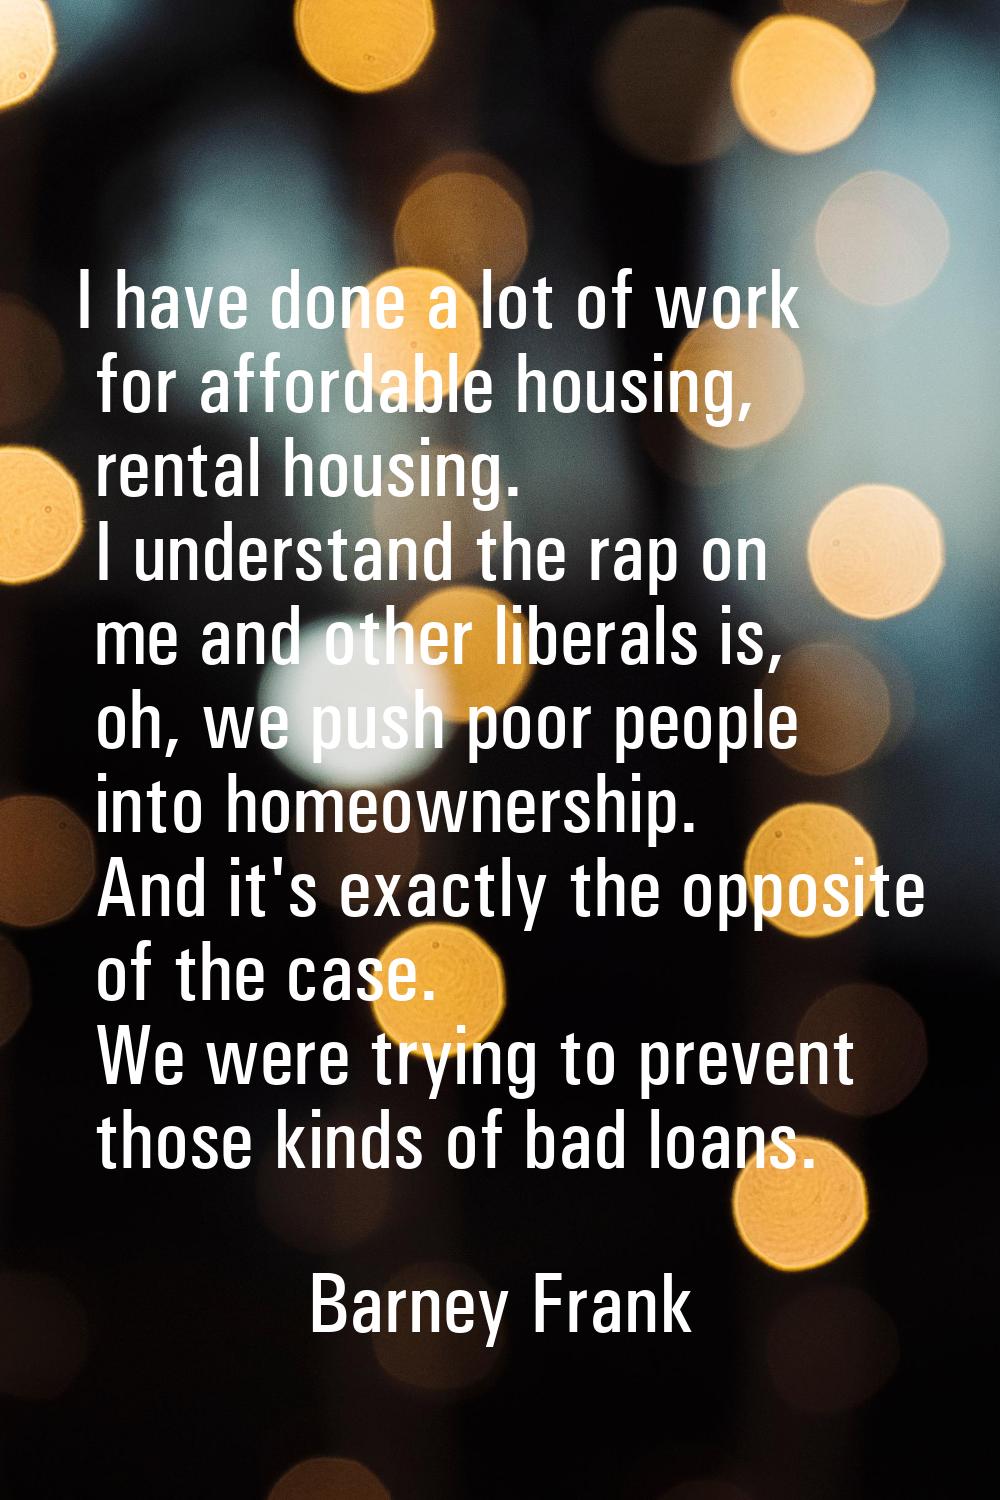 I have done a lot of work for affordable housing, rental housing. I understand the rap on me and ot